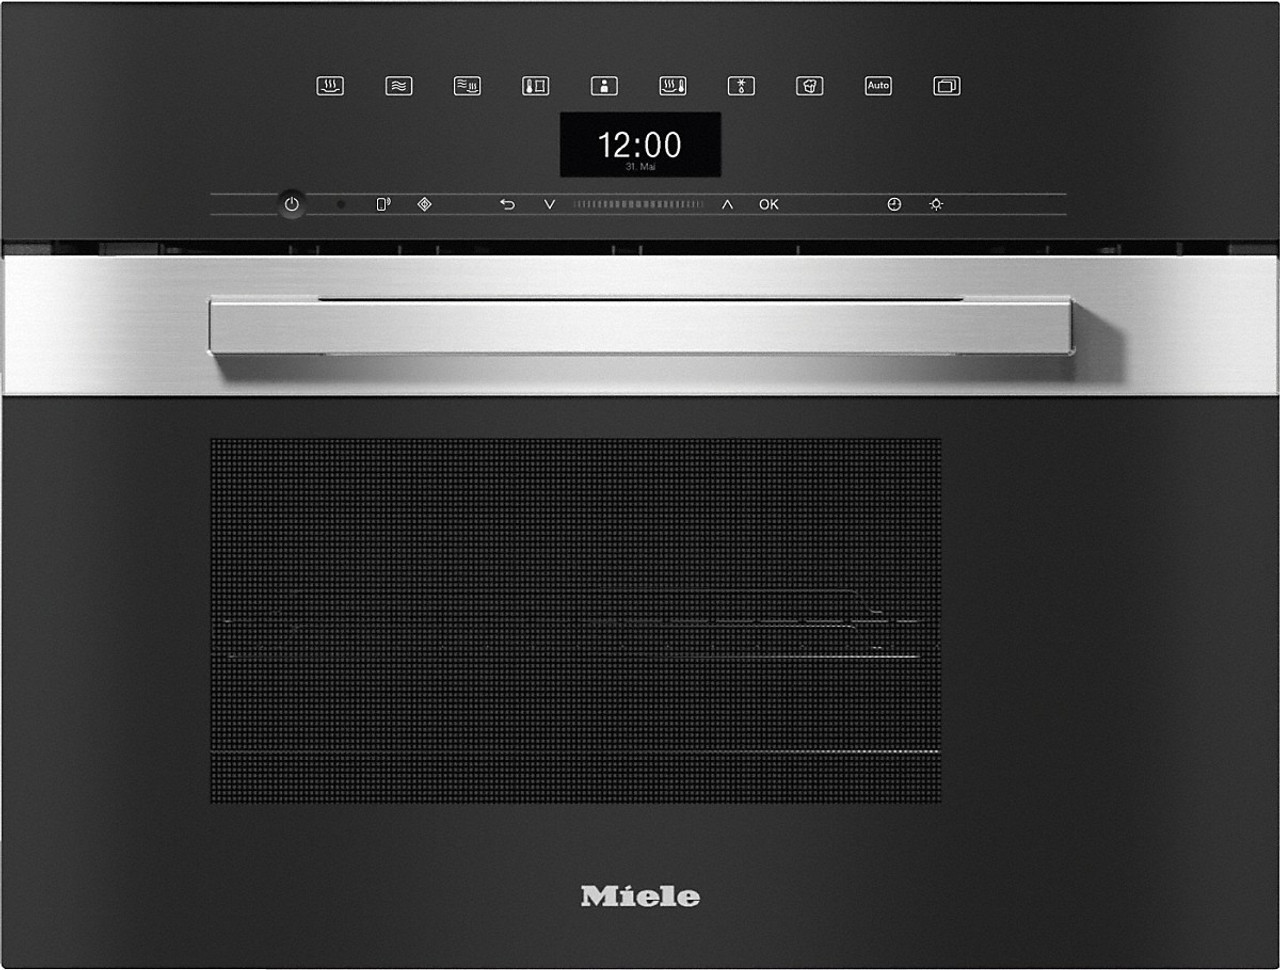 DGM 7440 - Steam Oven with Microwave in Clean Steel